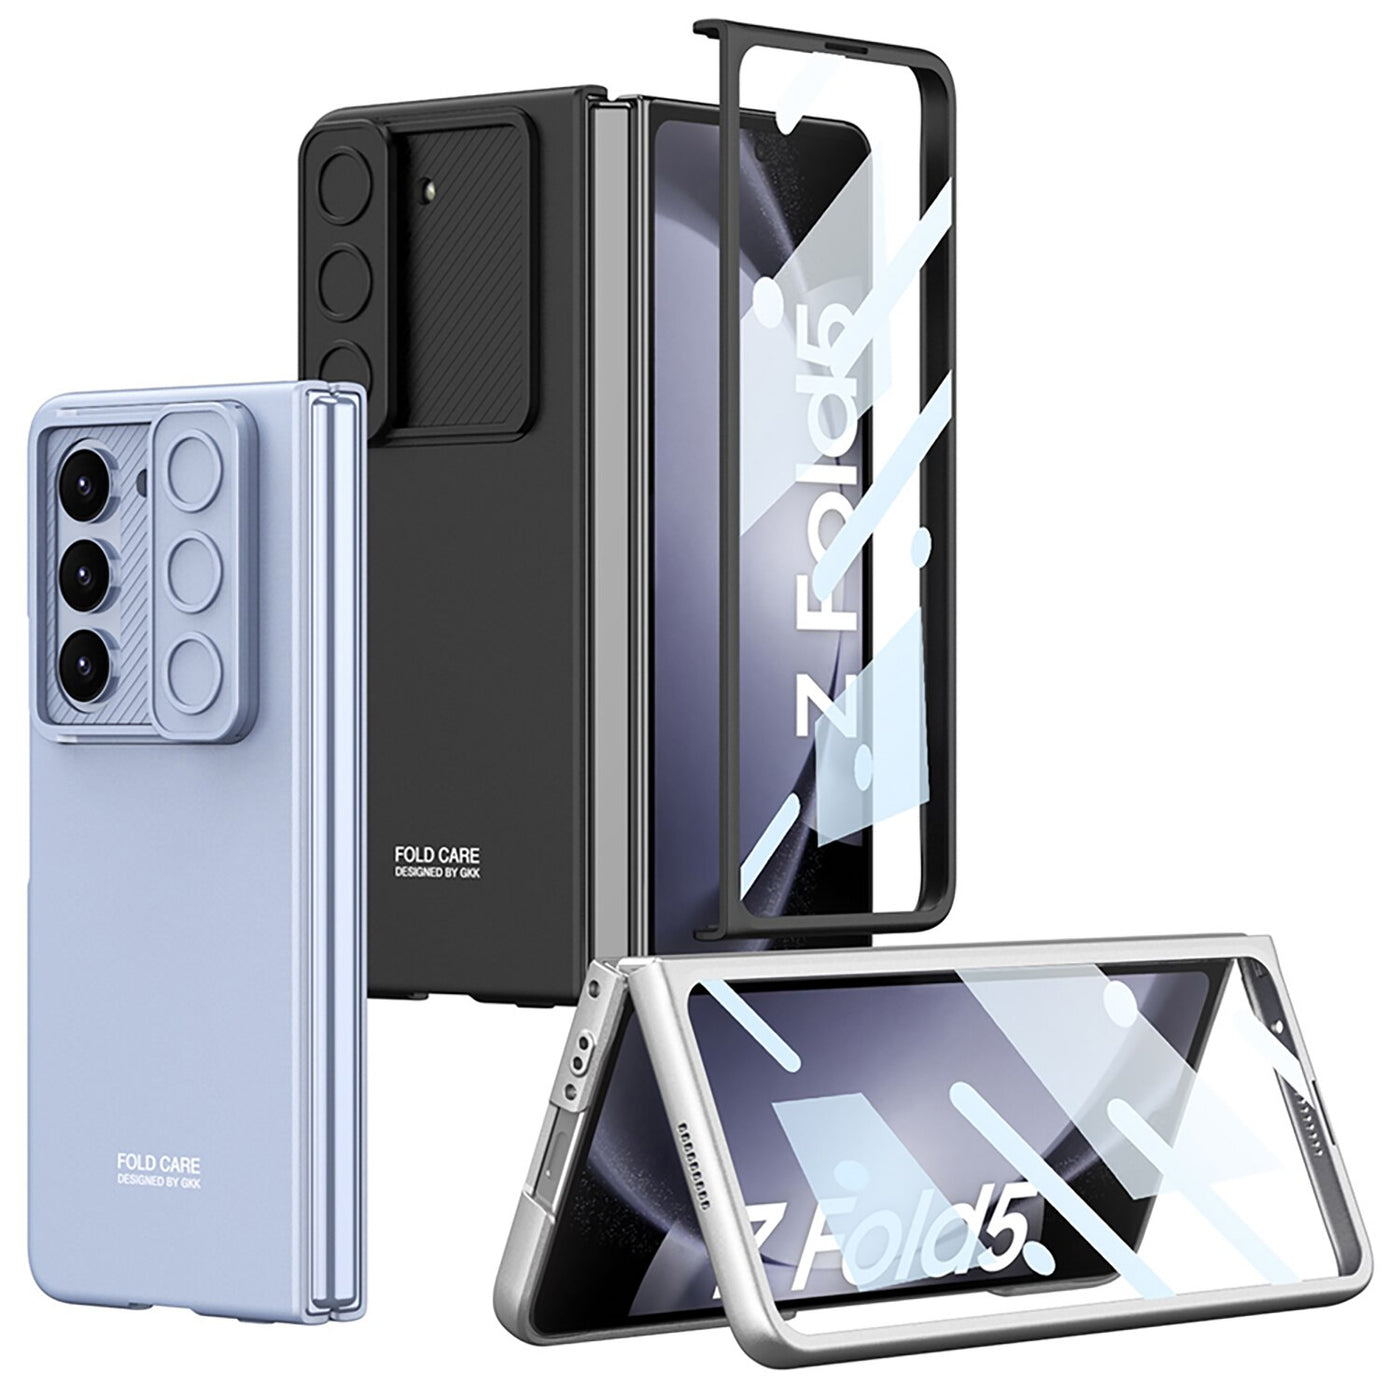 Slim Shockproof Case with Slide Camera Protector for Samsung Galaxy Z Fold 5